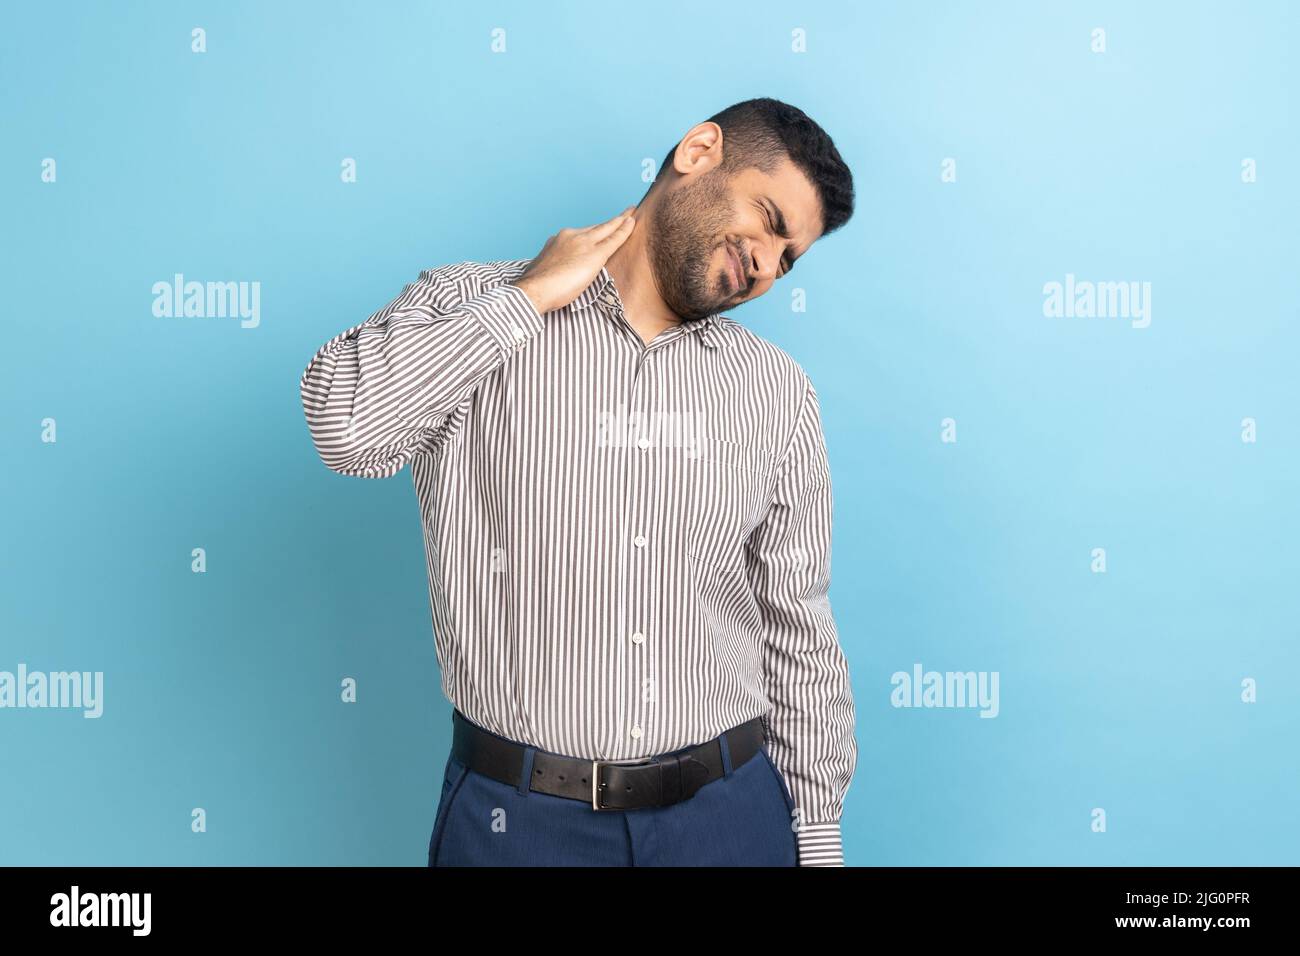 Anxious upset businessman massaging numb neck feeling pain, muscles tension, uncomfortable sleeping conditions, wearing striped shirt. Indoor studio shot isolated on blue background. Stock Photo